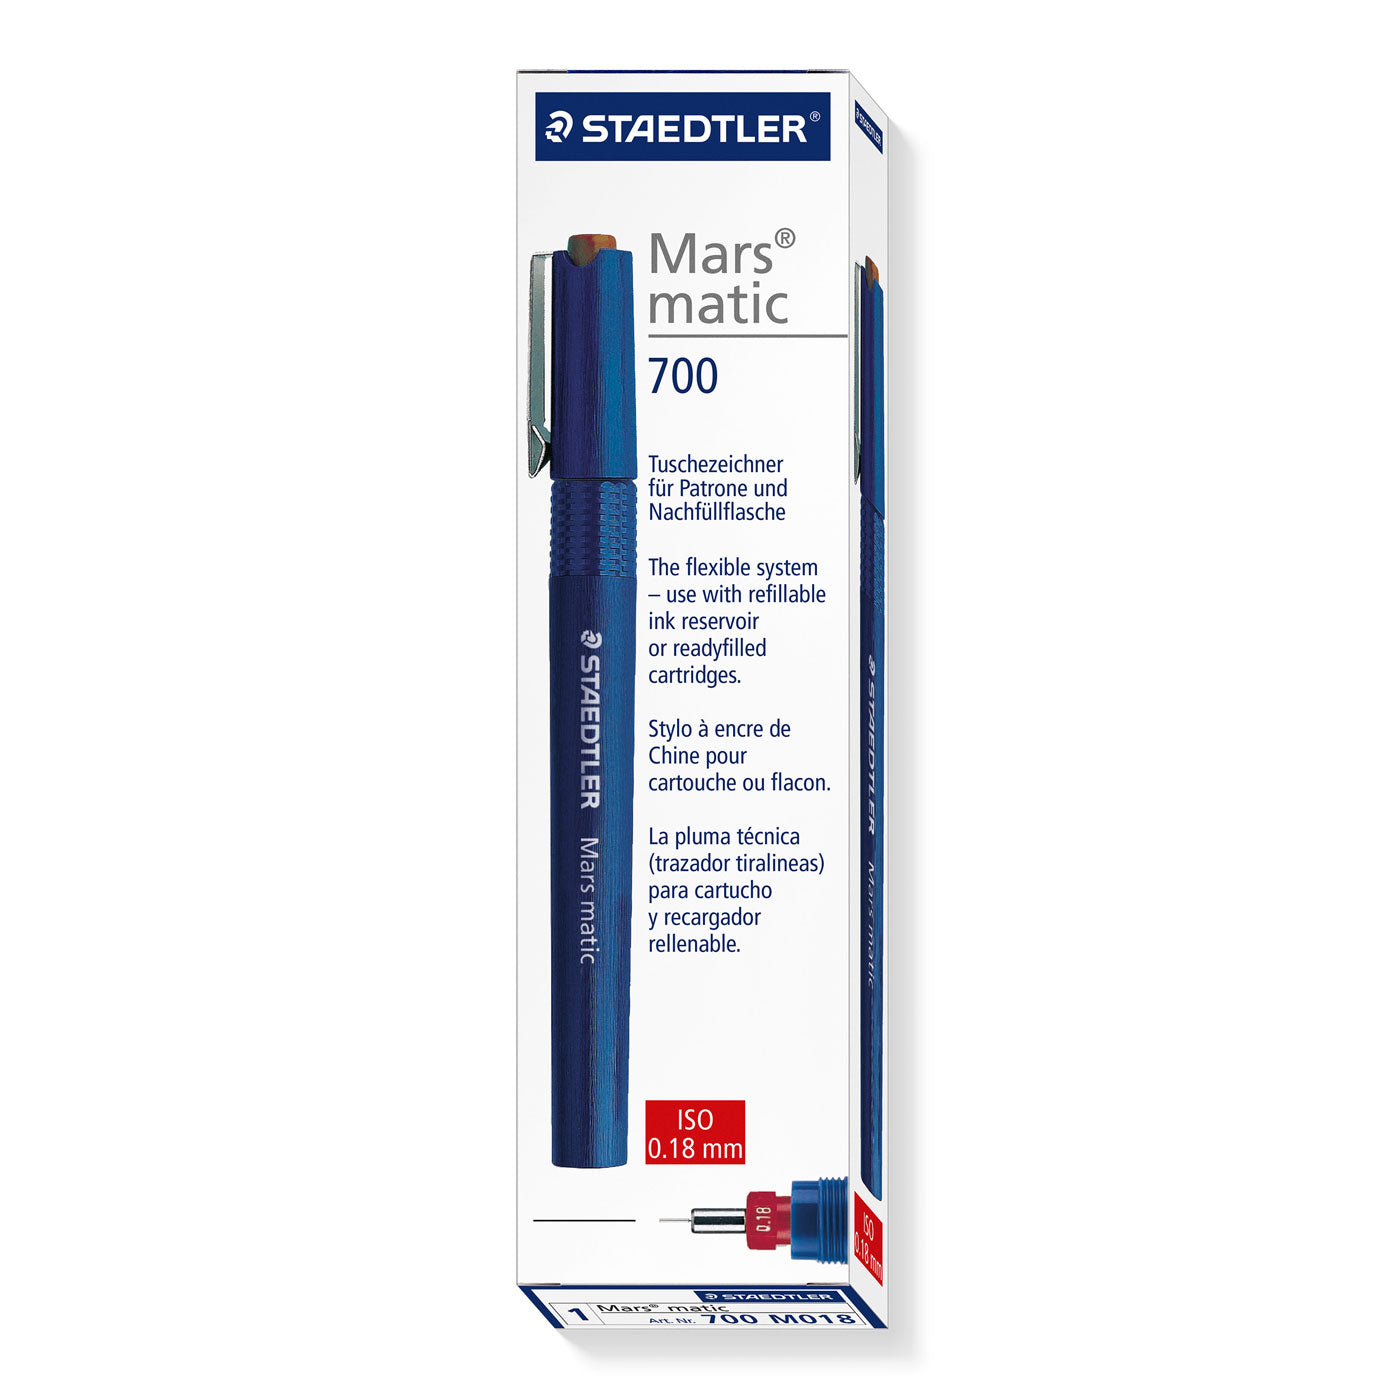 Staedtler Mars Matic 700 M018 Technical Drawing Pen 0.18mm Box